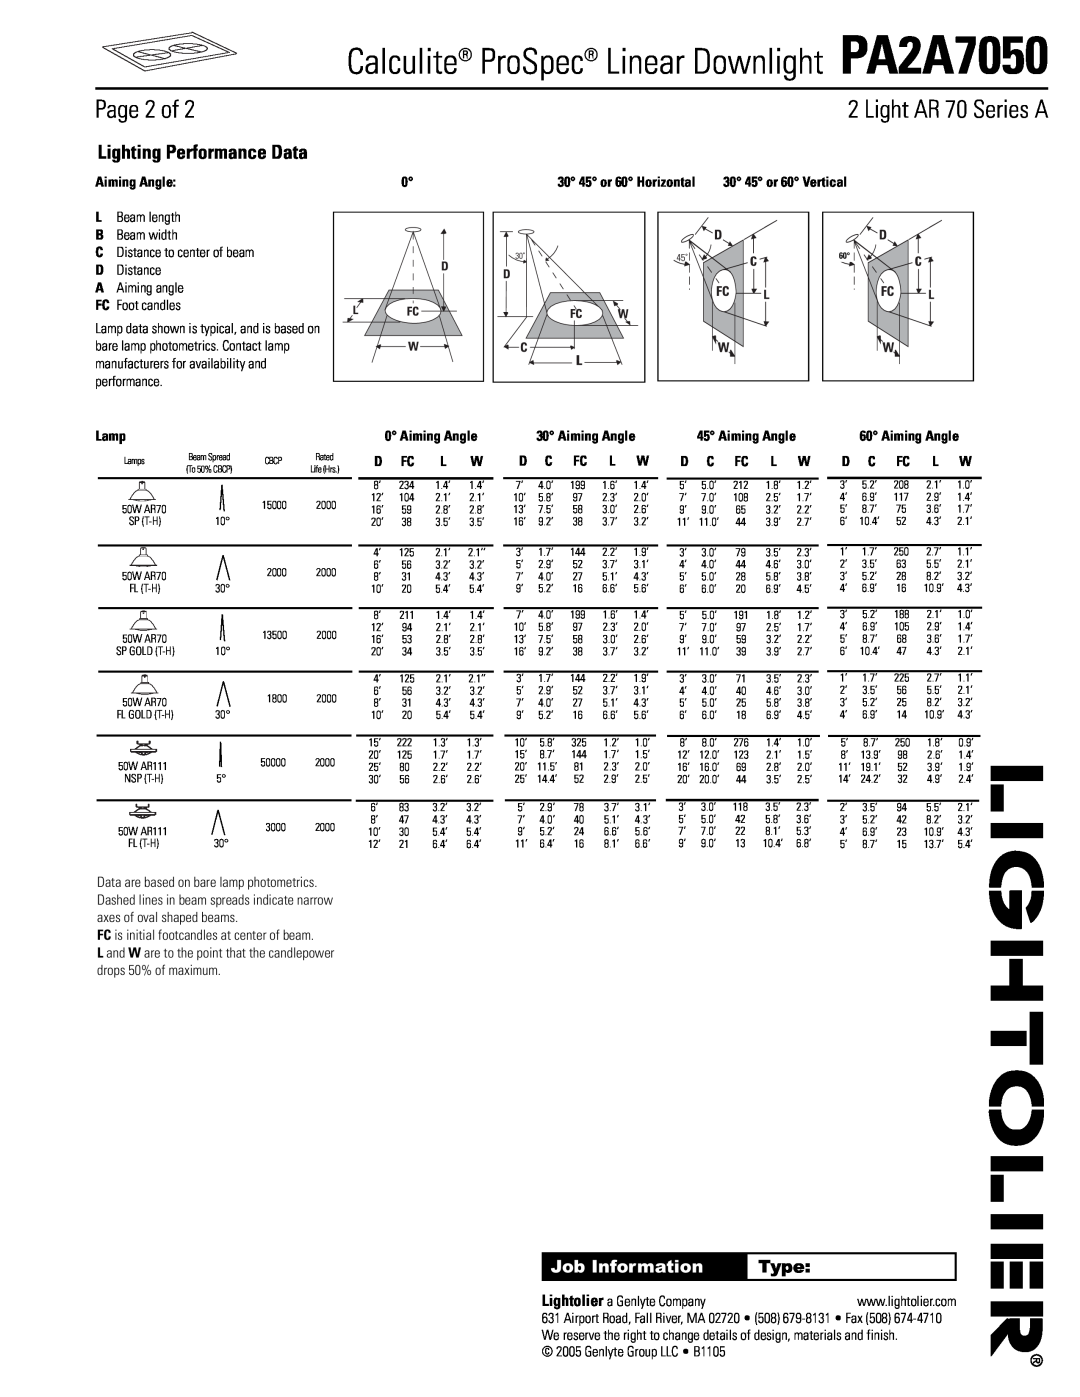 Lightolier PA2A7050 Page 2 of, Lighting Performance Data, Aiming Angle, 30 45 or 60 Vertical, Lamp, D Fc, D C Fc L W, Type 